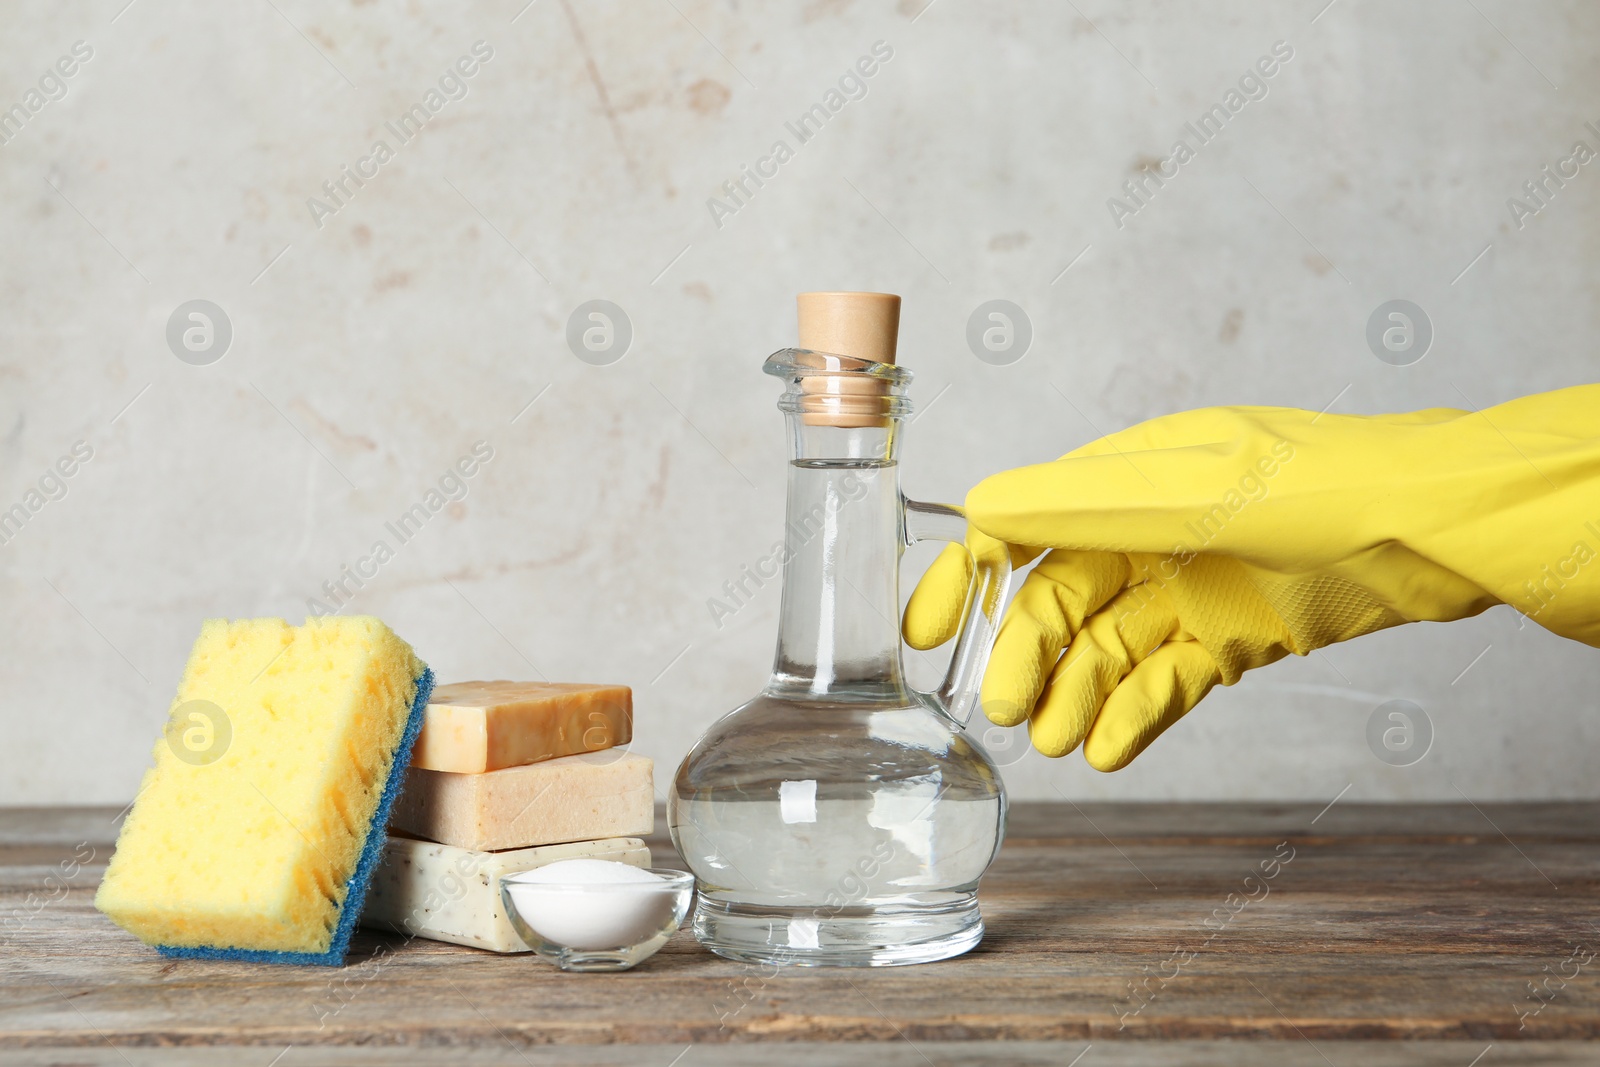 Photo of Woman with jug of vinegar and cleaning supplies at table